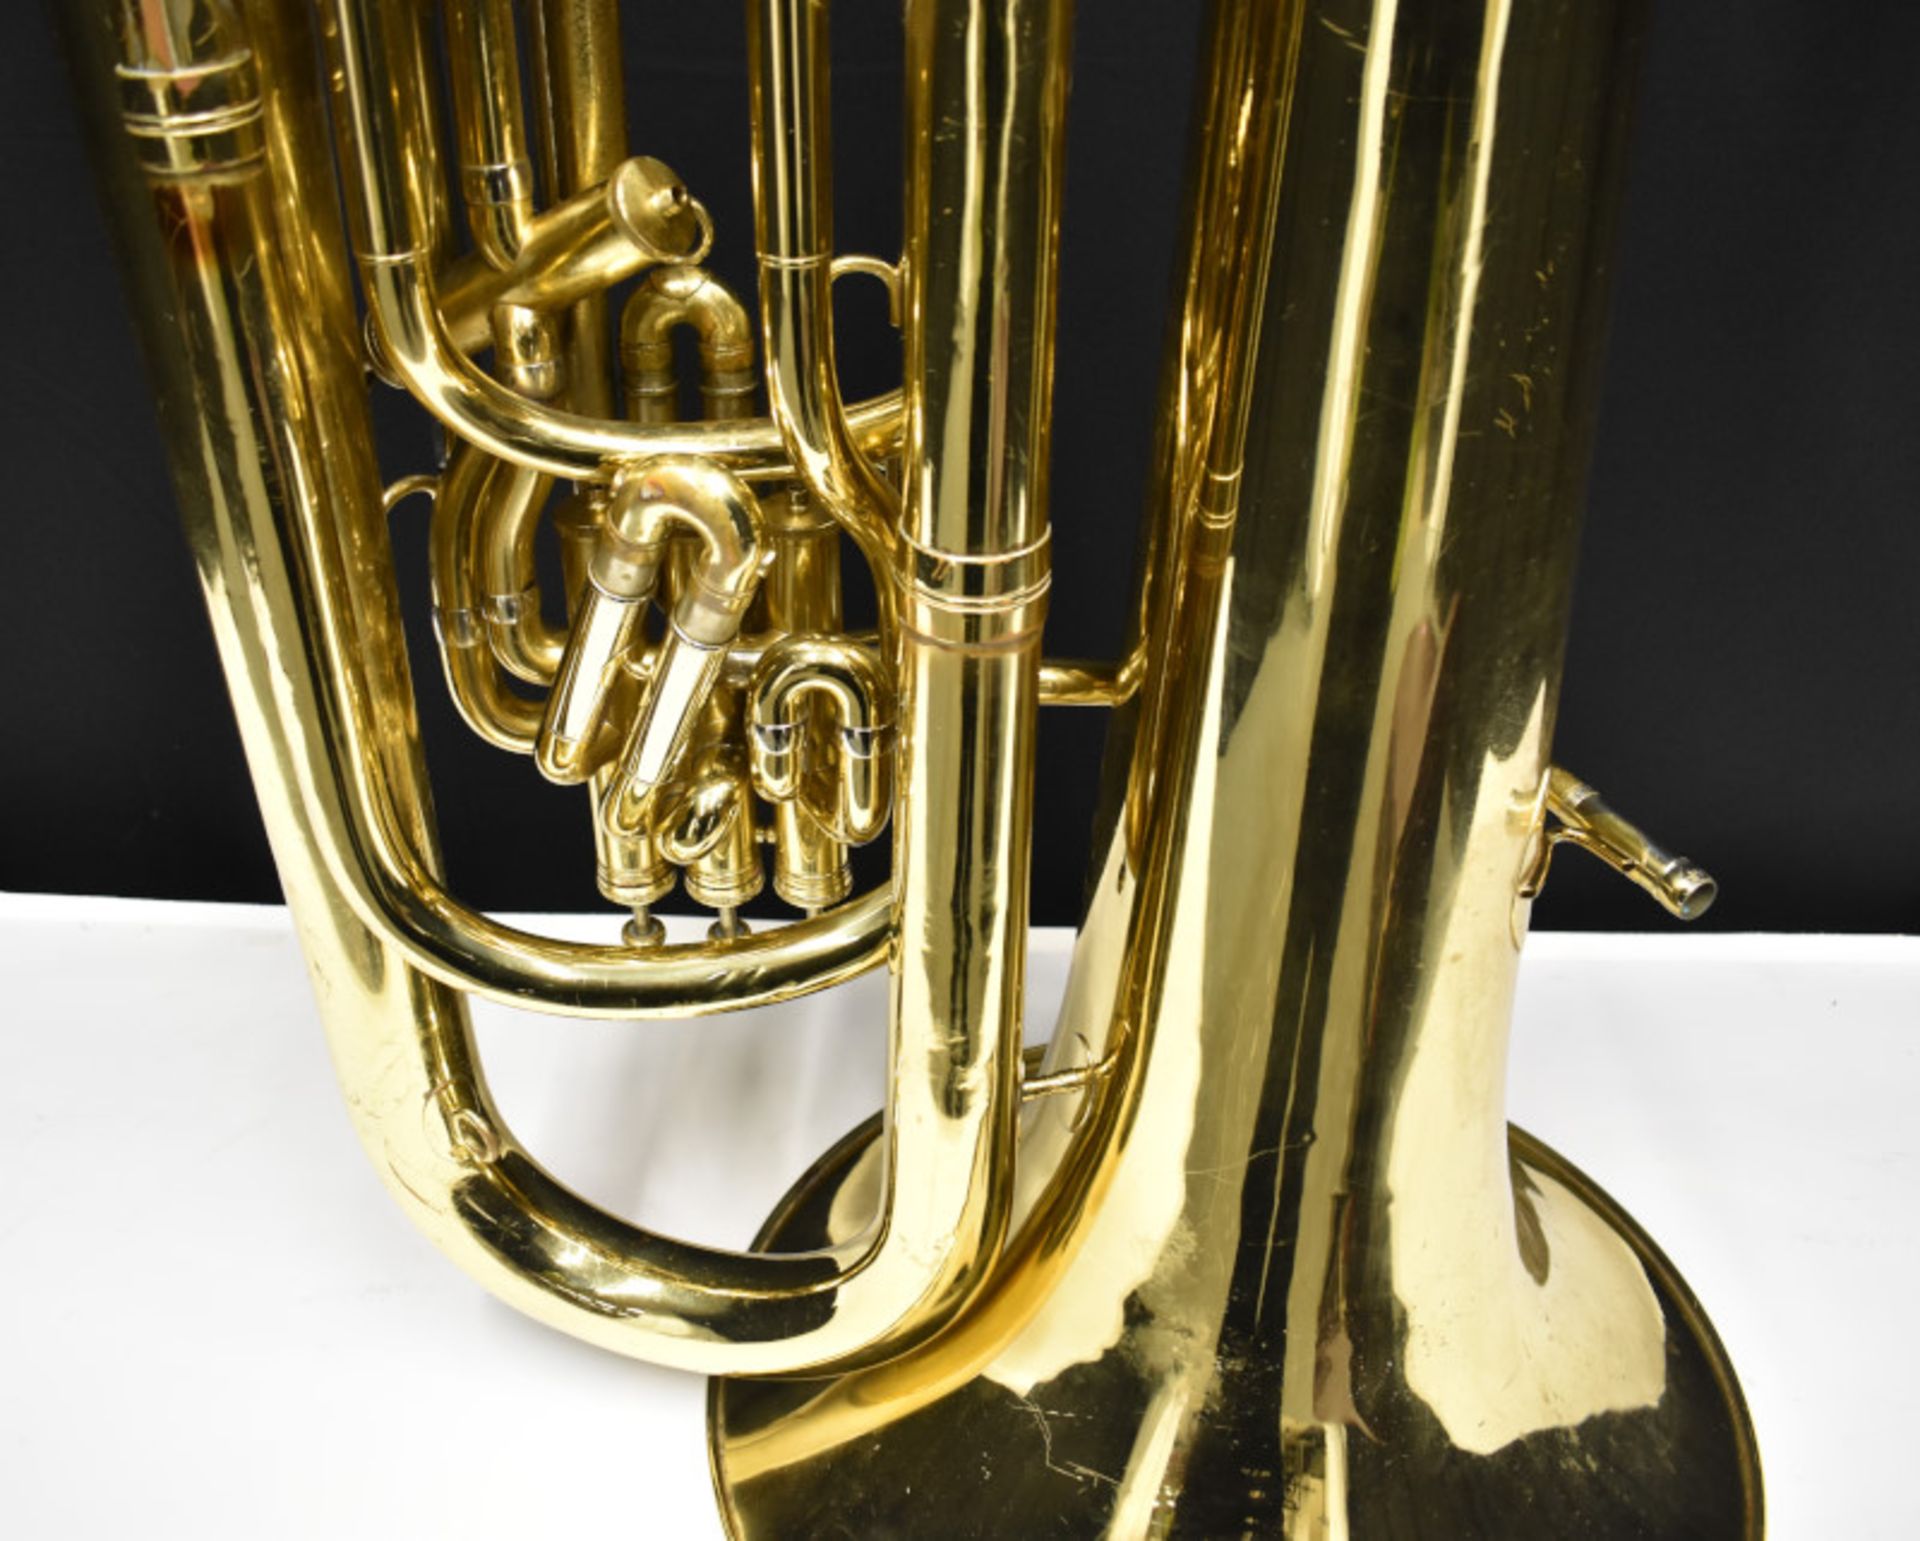 Besson Sovereign BE994 Tuba in Besson Case (case damaged no wheels) - Serial No. 883092 - - Image 10 of 21